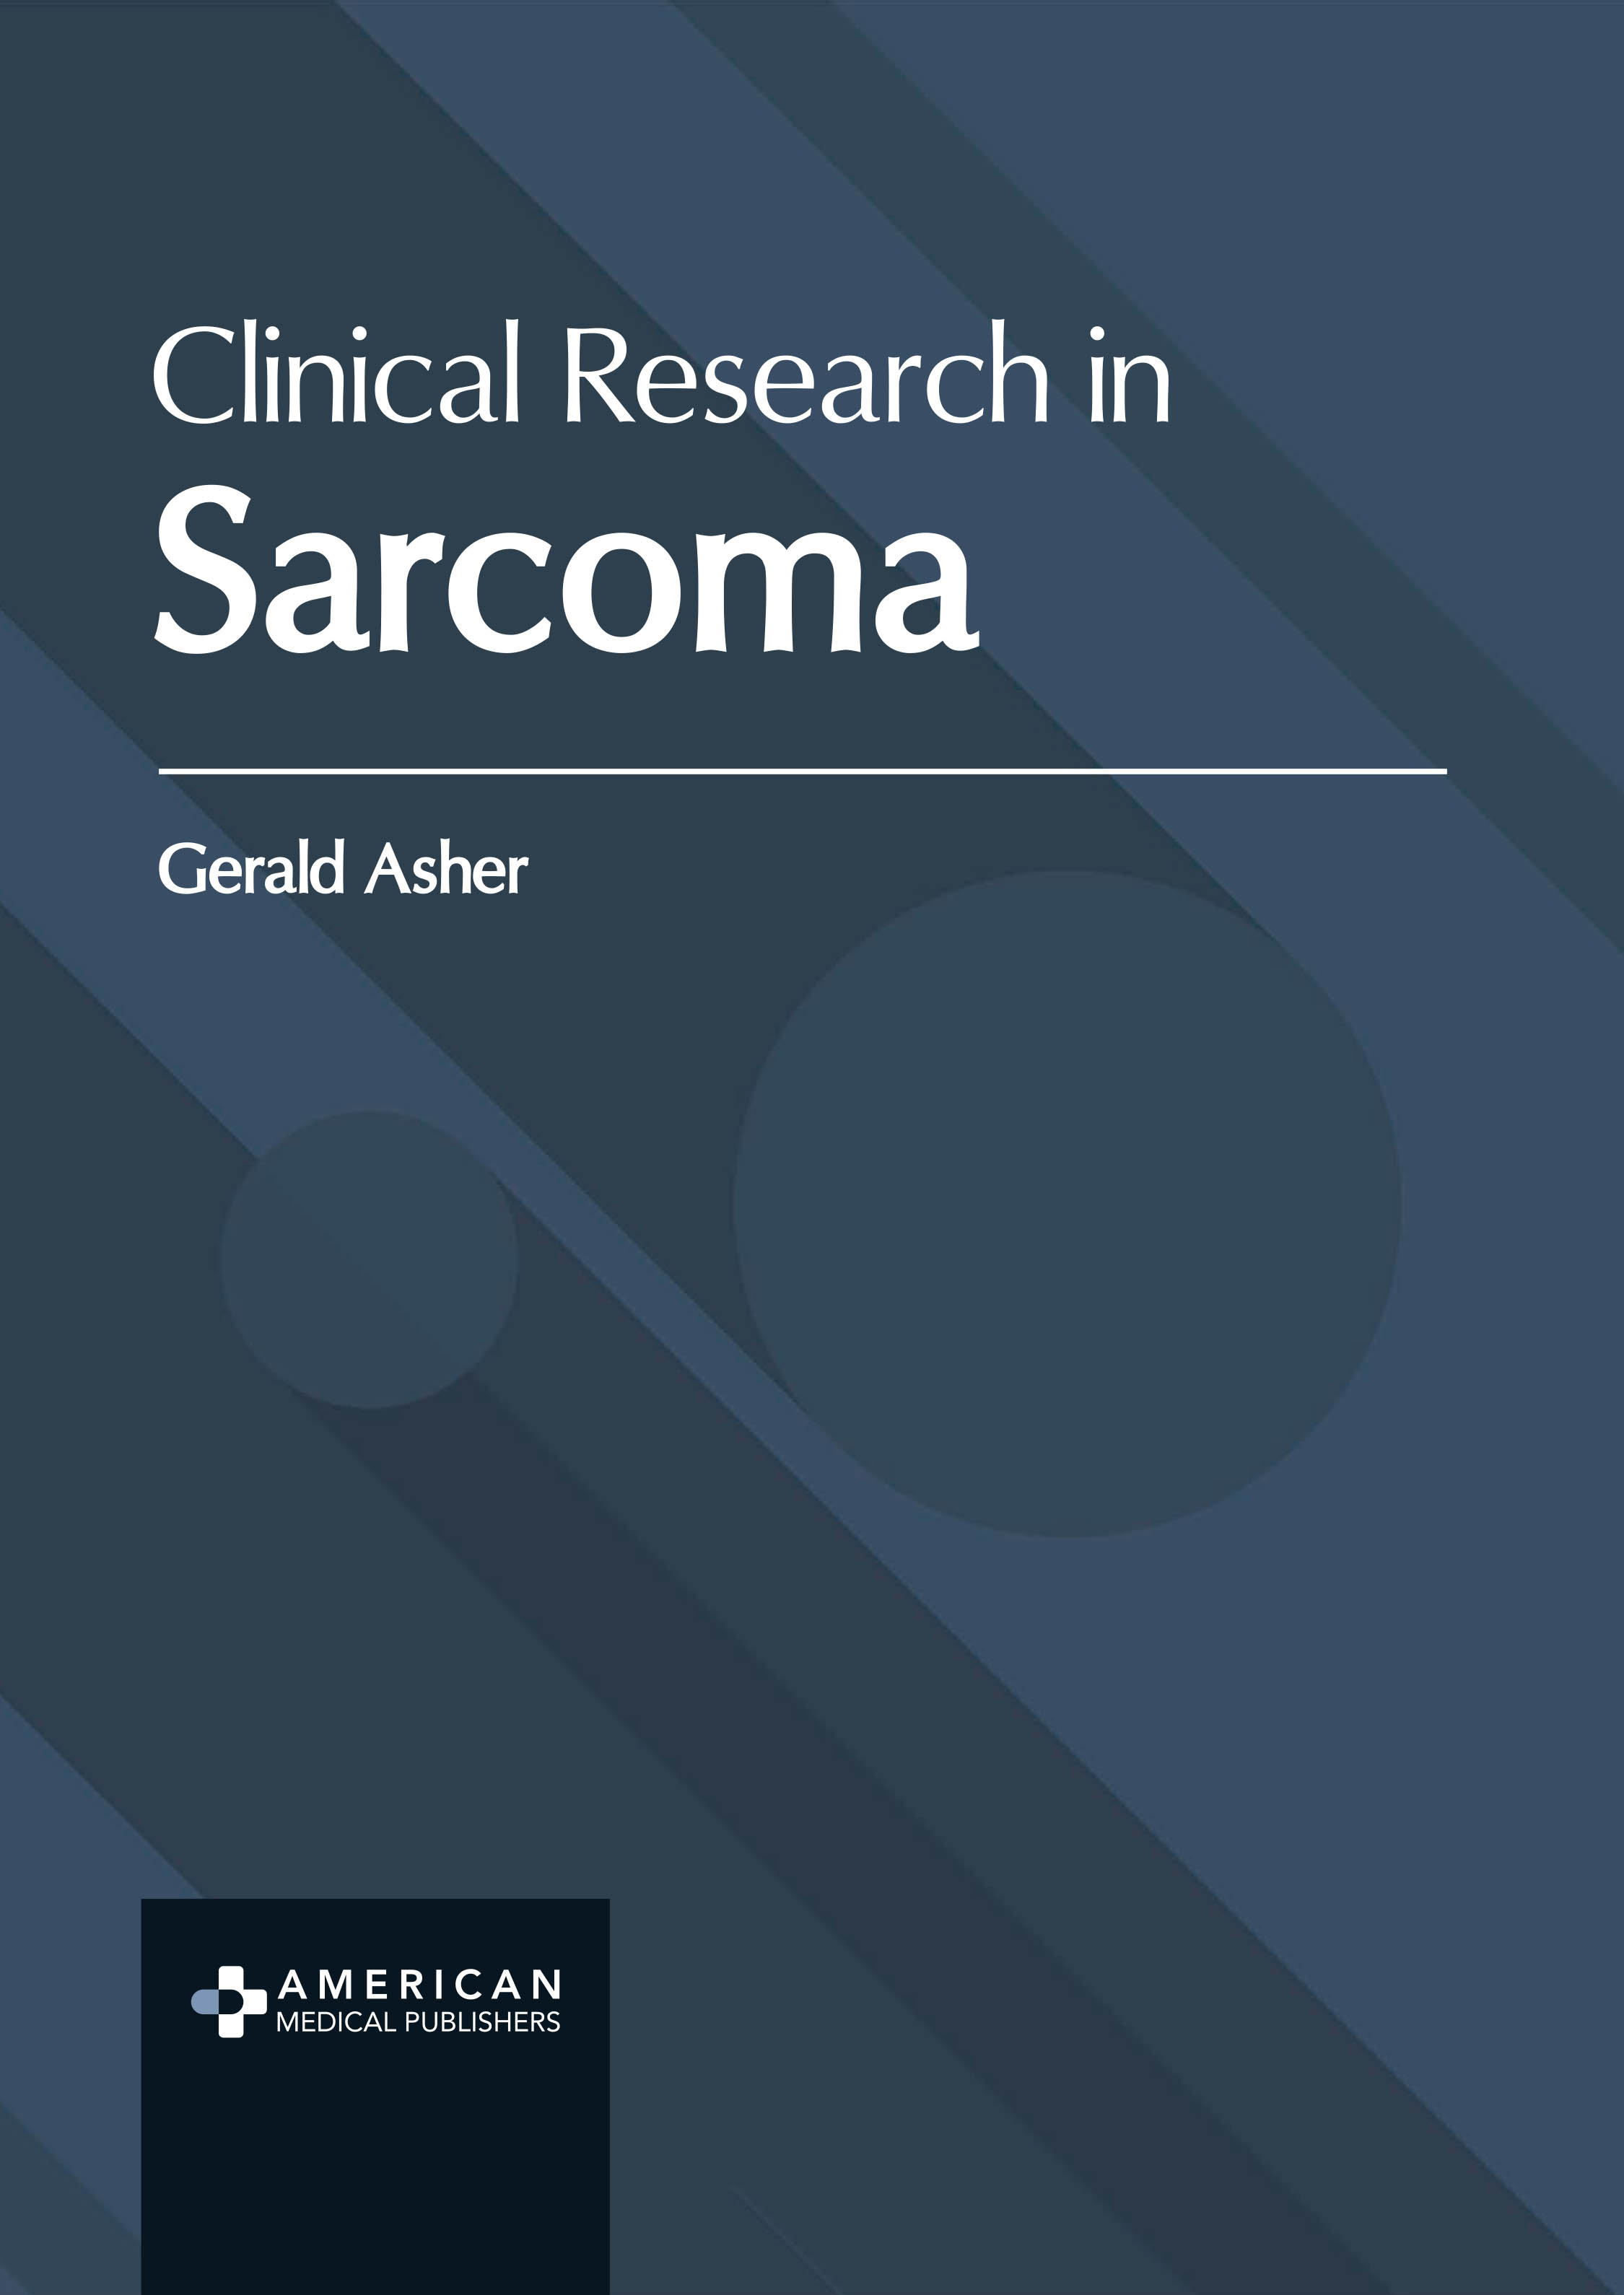 CLINICAL RESEARCH IN SARCOMA